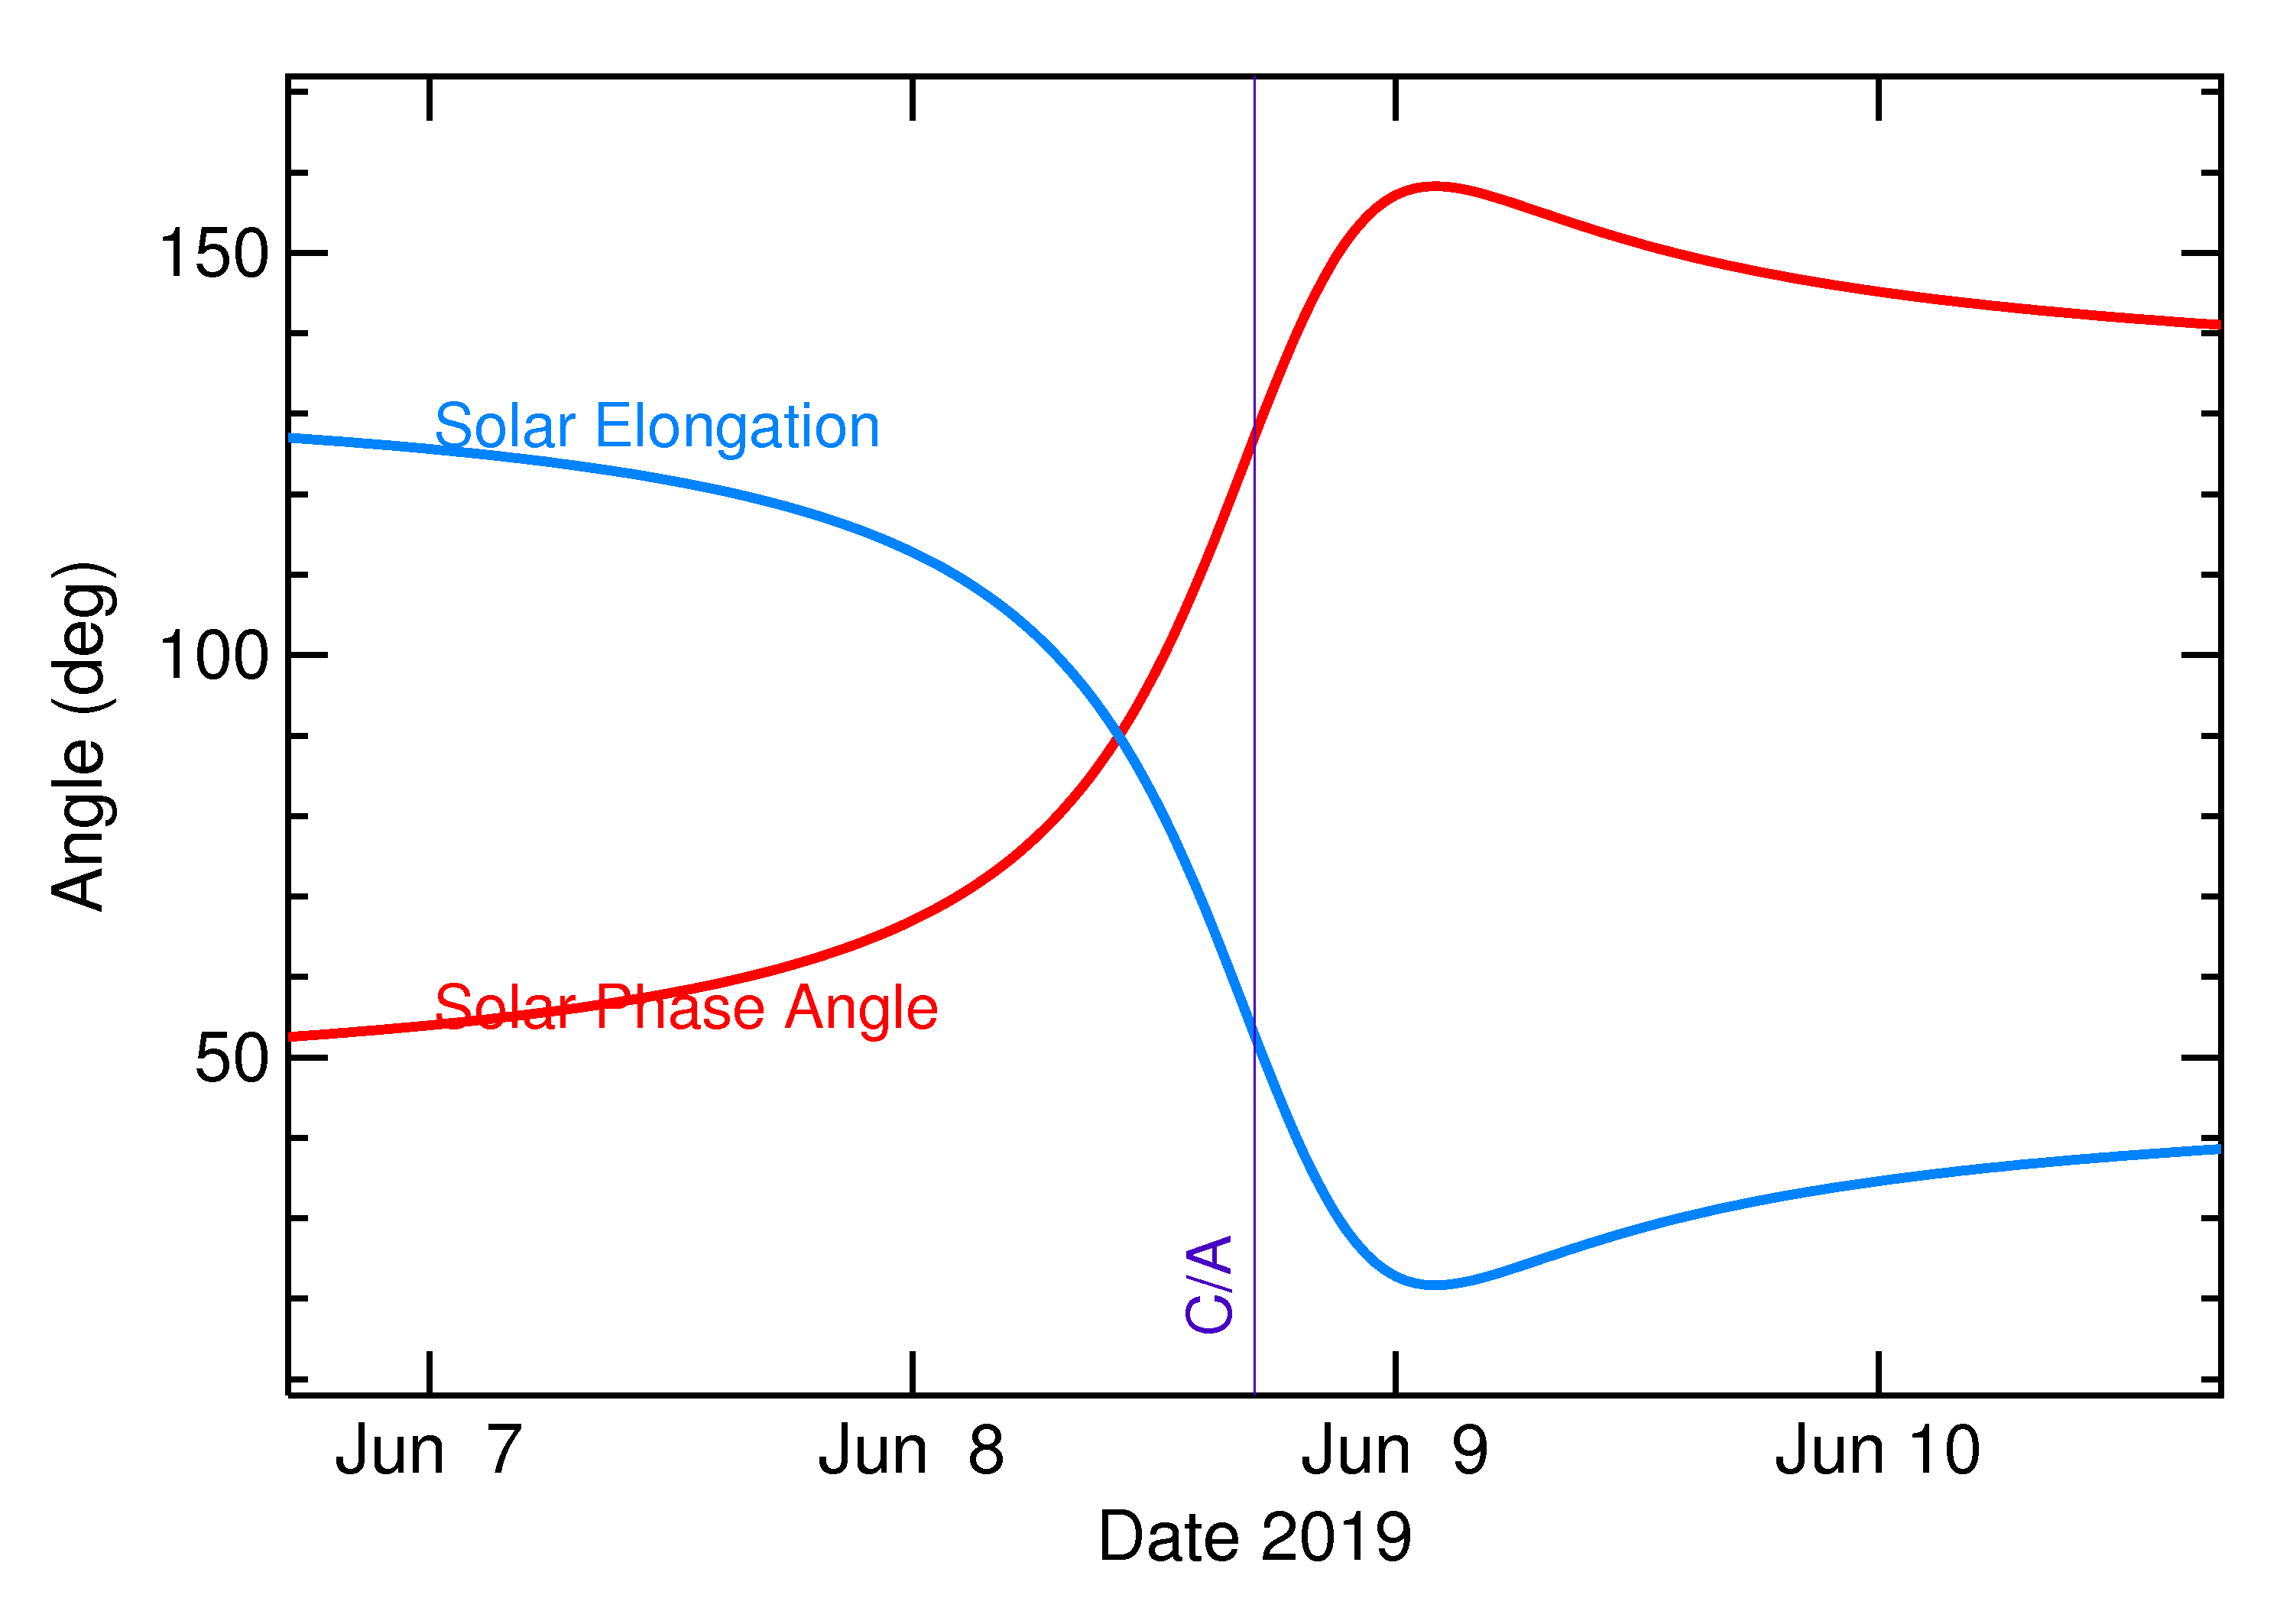 Solar Elongation and Solar Phase Angle of 2019 LW4 in the days around closest approach